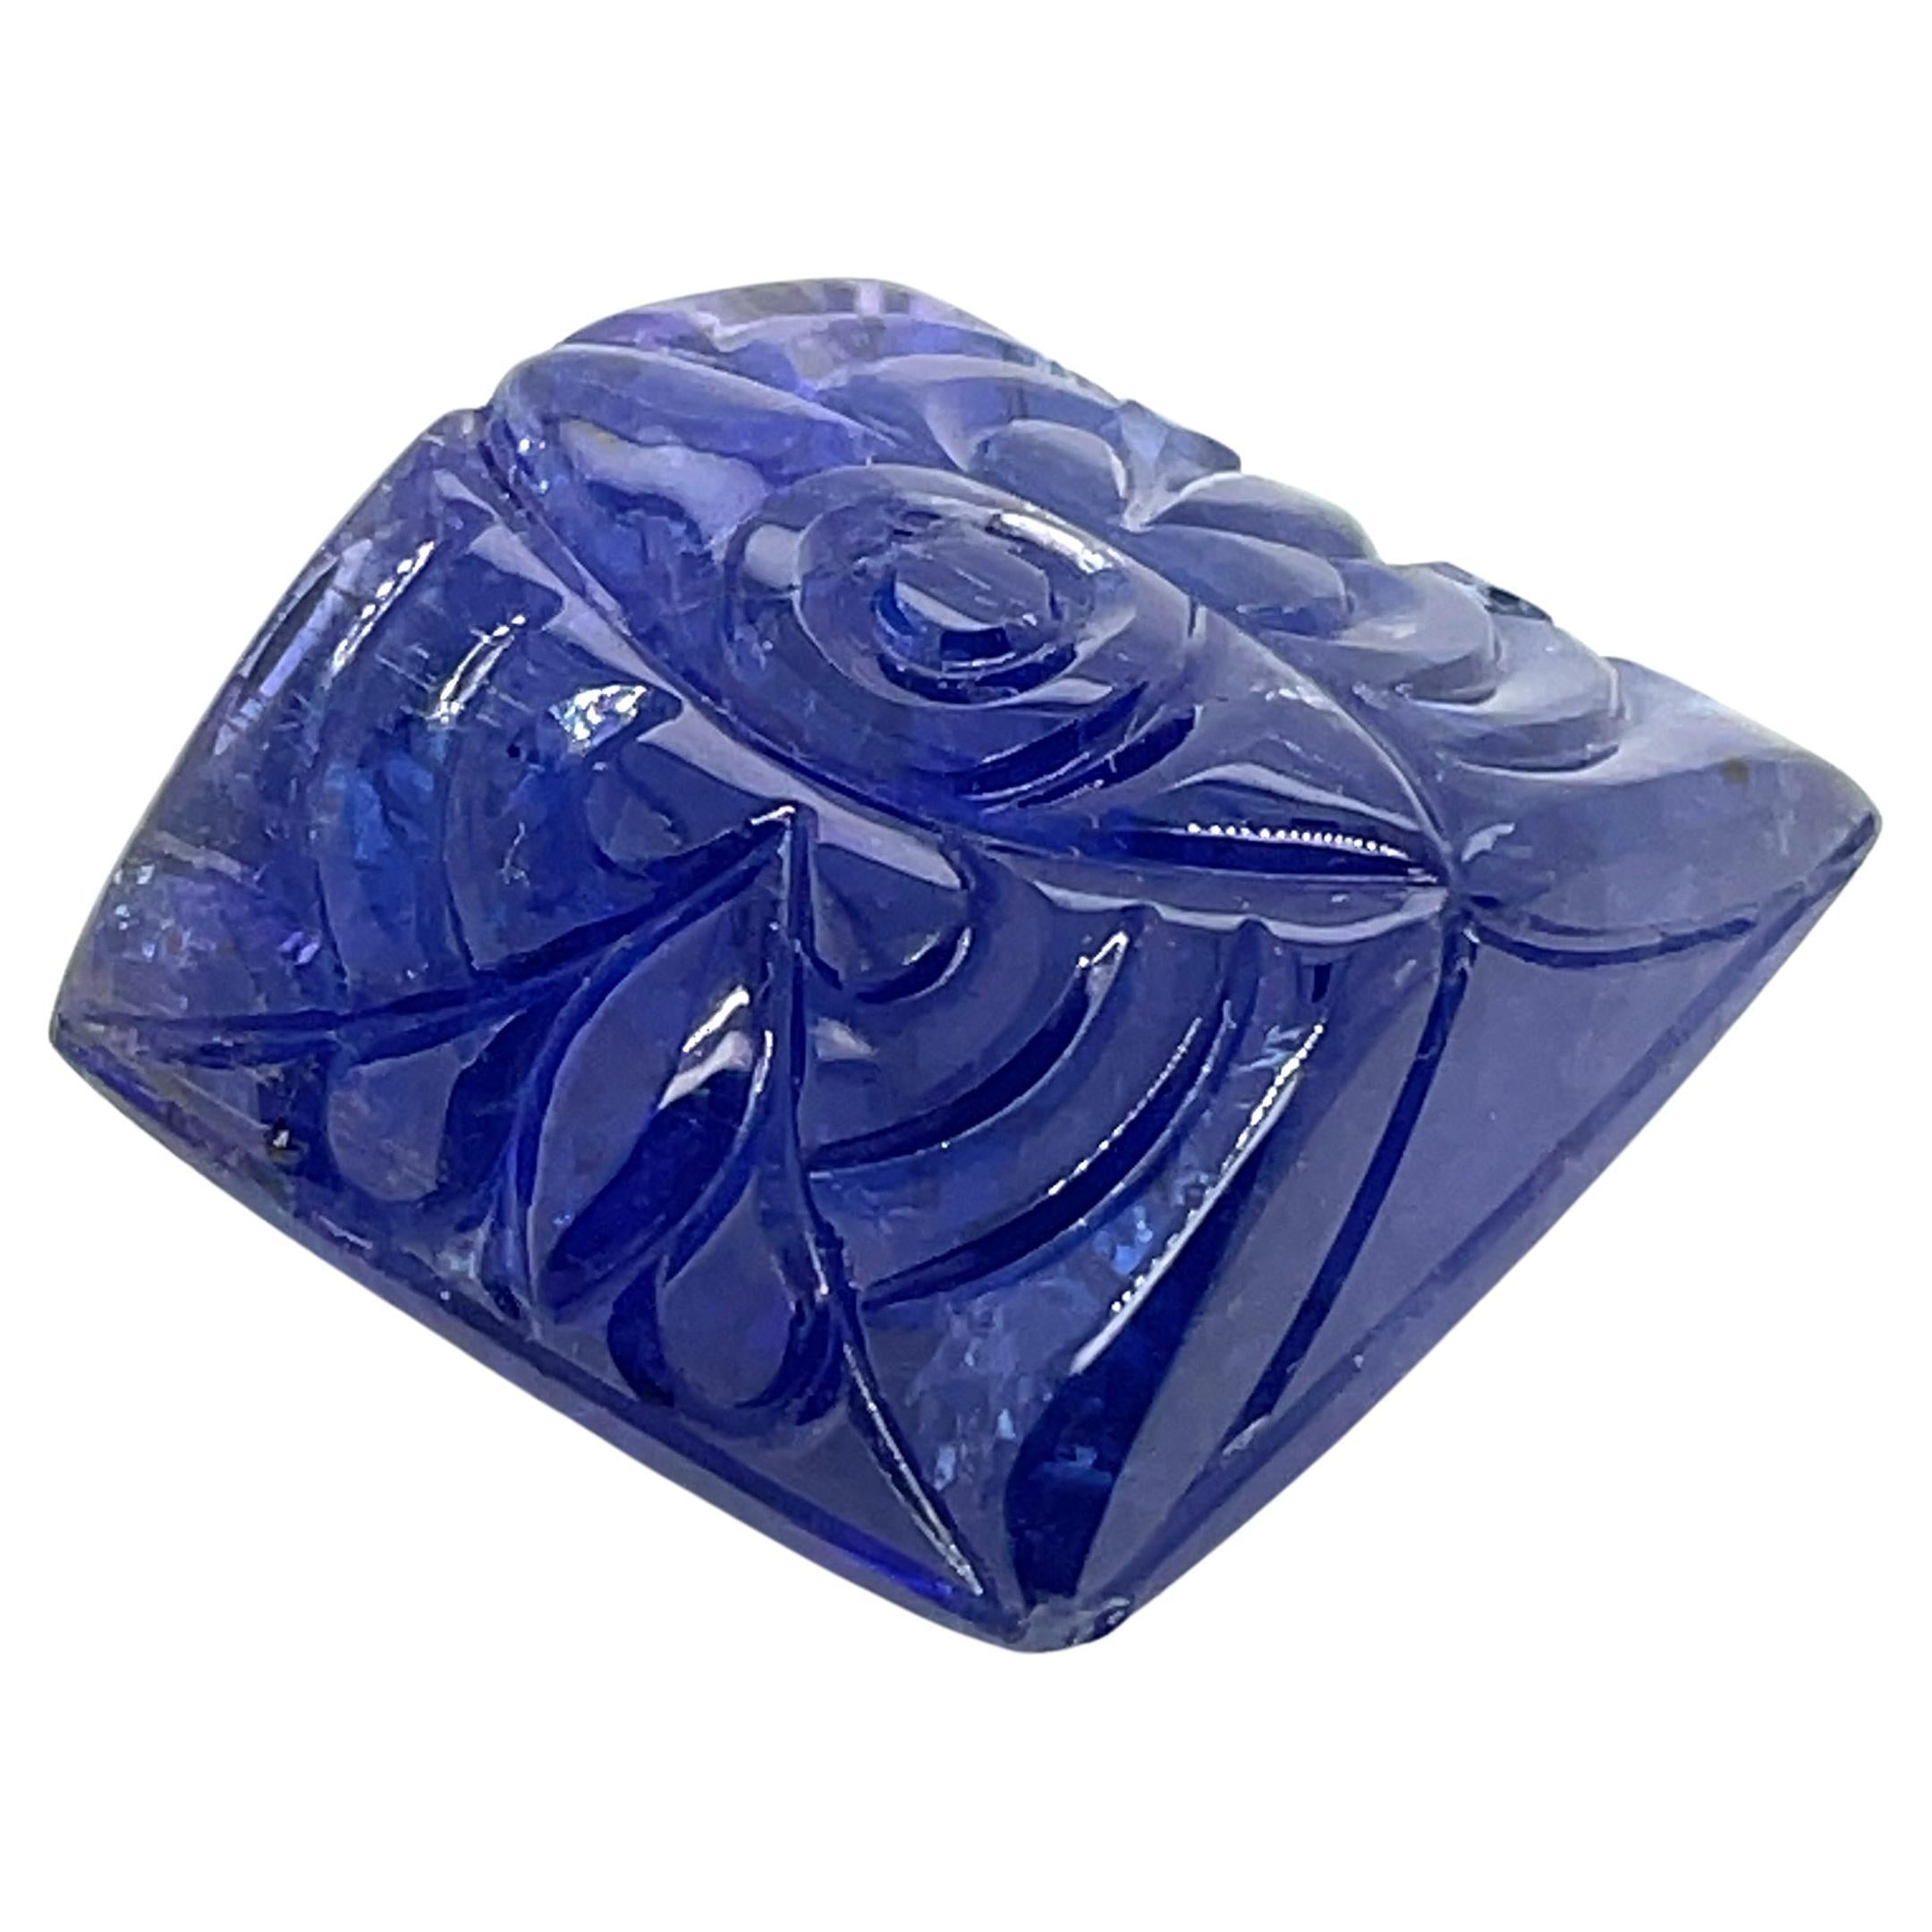 With an eye carved into the center of the stone, it seems to hold secrets of its own. 

This 79.71-carat carved eye tanzanite is a captivating work of art that begs to be explored.

Tanzanite itself has deep symbolic meaning; it stands for mental